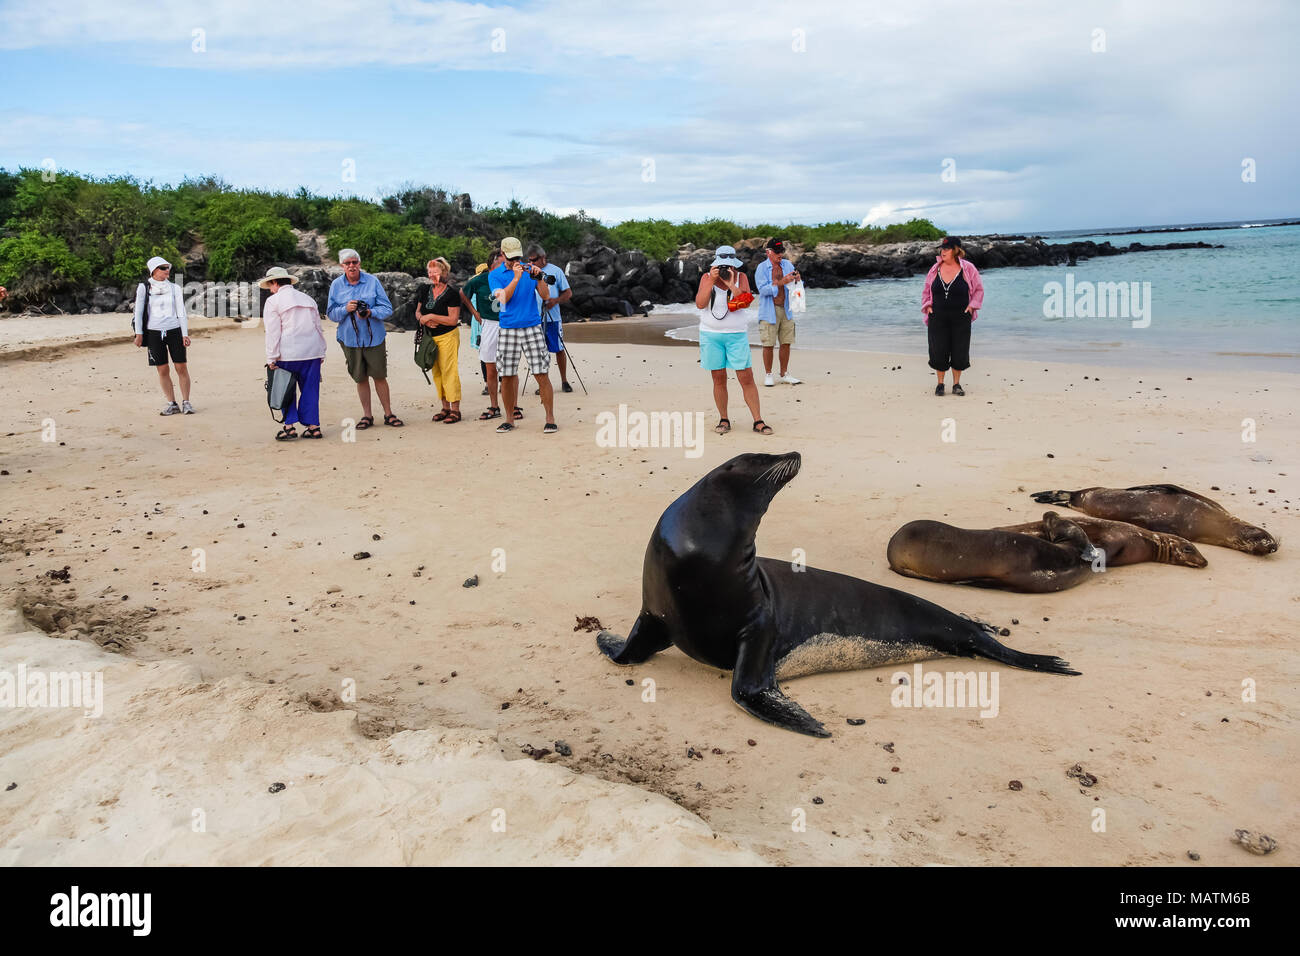 Isla Lobos, Galapagos, Ecuador, January 5, 2012: Group of unidentified tourists watching a group of sea lions on the beach of Galapagos Stock Photo